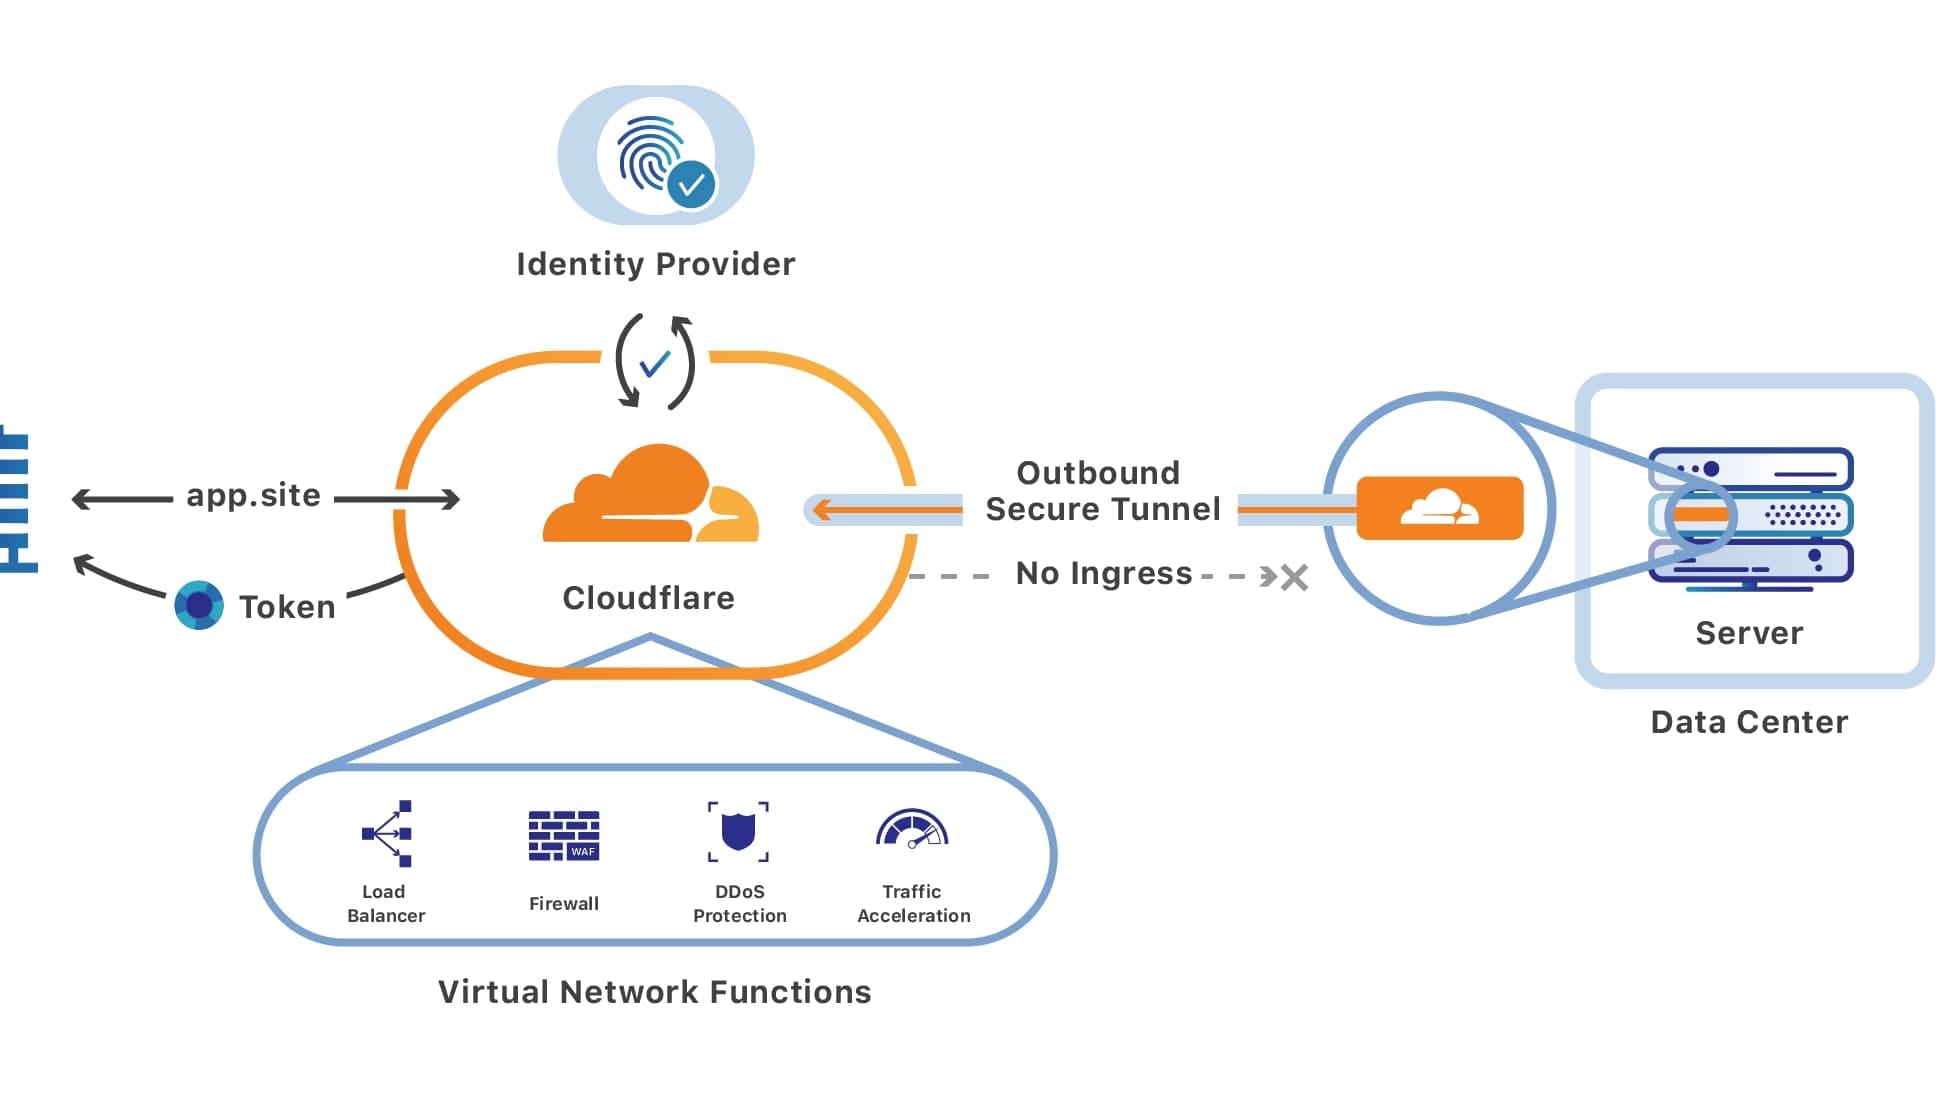 Cloudflare gains a significant advantage thanks to its extensive global network infrastructure